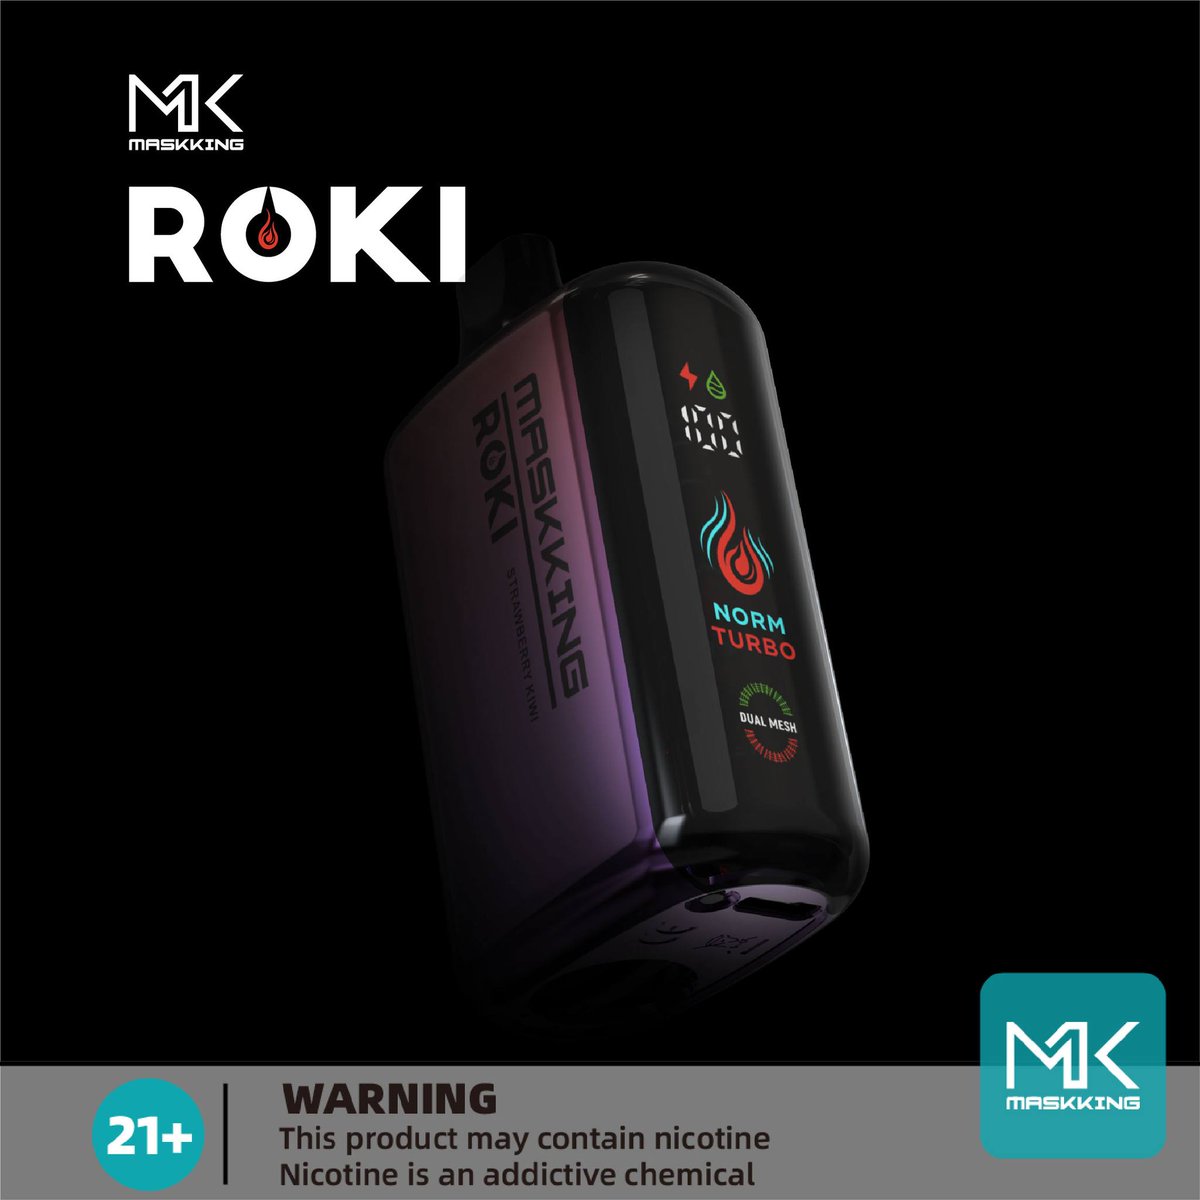 Press the bottom button of Roki to switch two modes, with 🚀turbo mode providing a more intense and 🌈flavorful vaping experience

Welcome to contact: +86 17727939805
#maskking #roki #roki15000 #maskkingroki #maskking15000 #newarrival #vapeusa #vapedubai #vapegermany #vapefrance